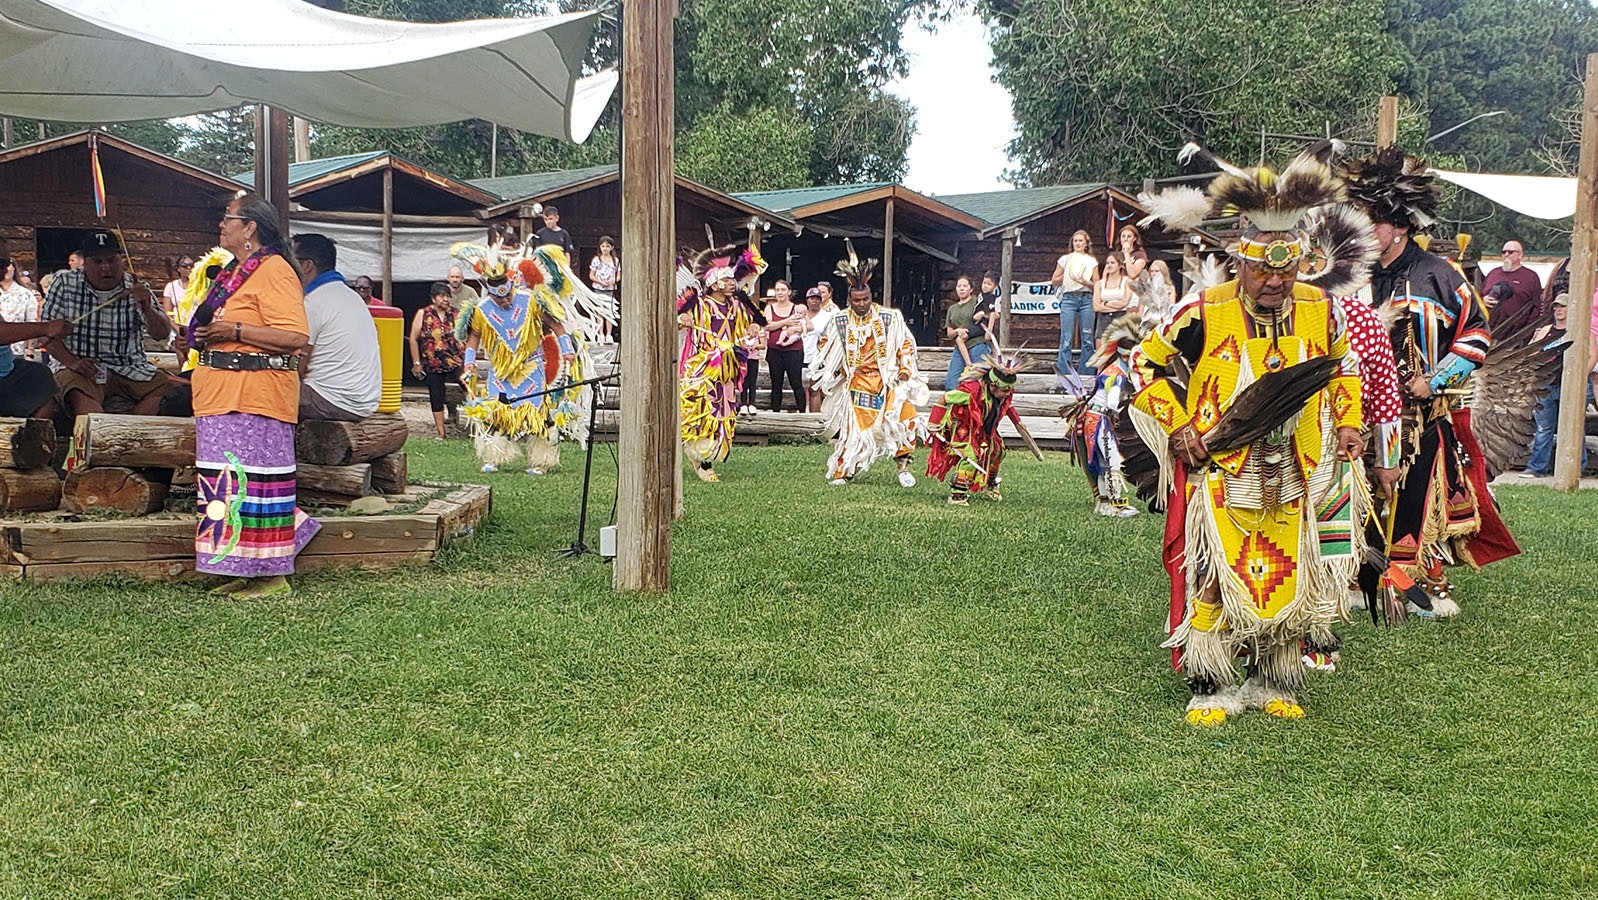 American Indian dancers perform at Cheyenne Frontier Days.